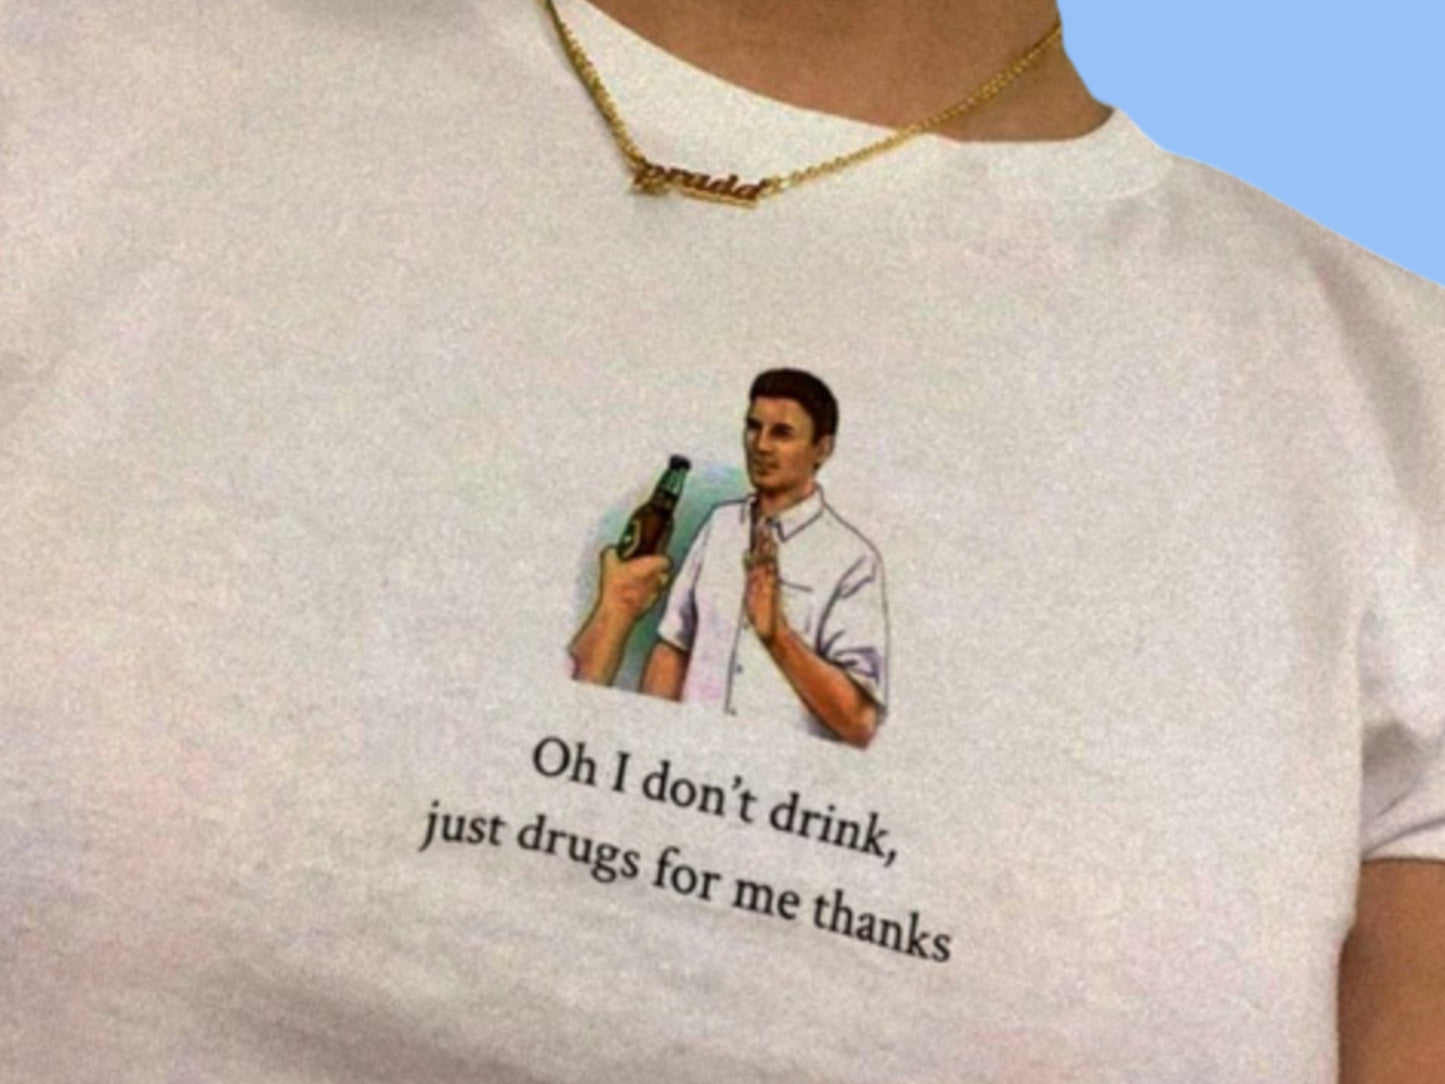 Oh I Don't Drink, Just Drugs For Me Thanks Baby Tee, Y2K Top, 90s Tee